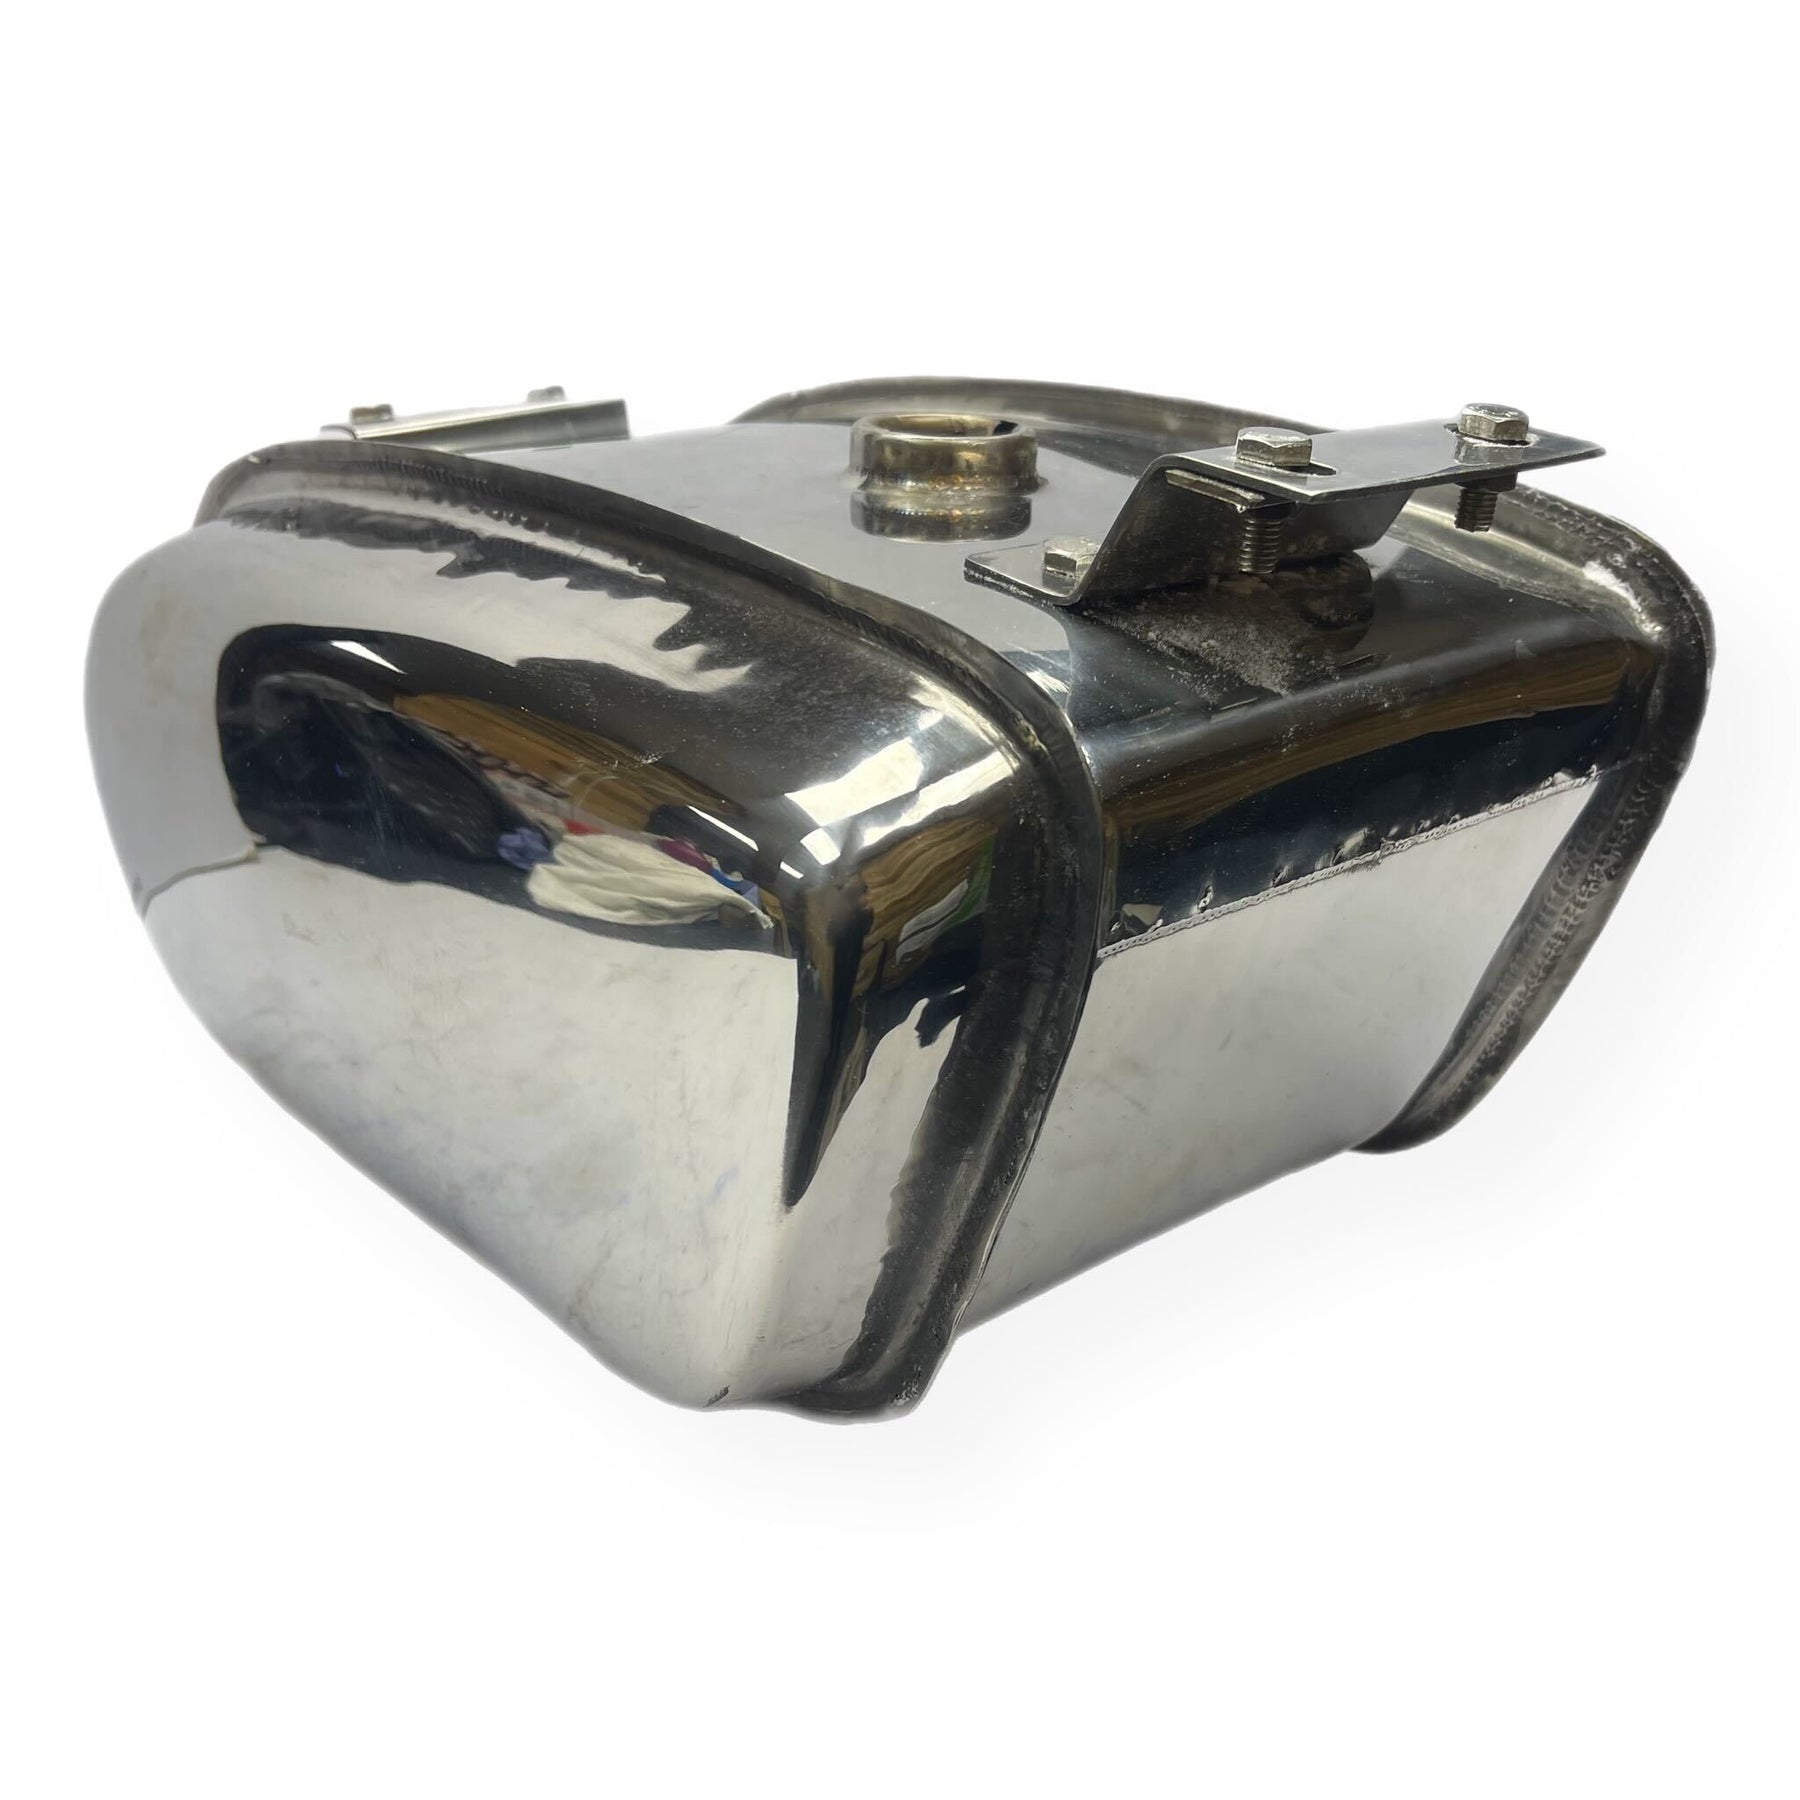 Lambretta Long Range 17 litre petrol tank with built-in toolbox - Polished Stainless Steel